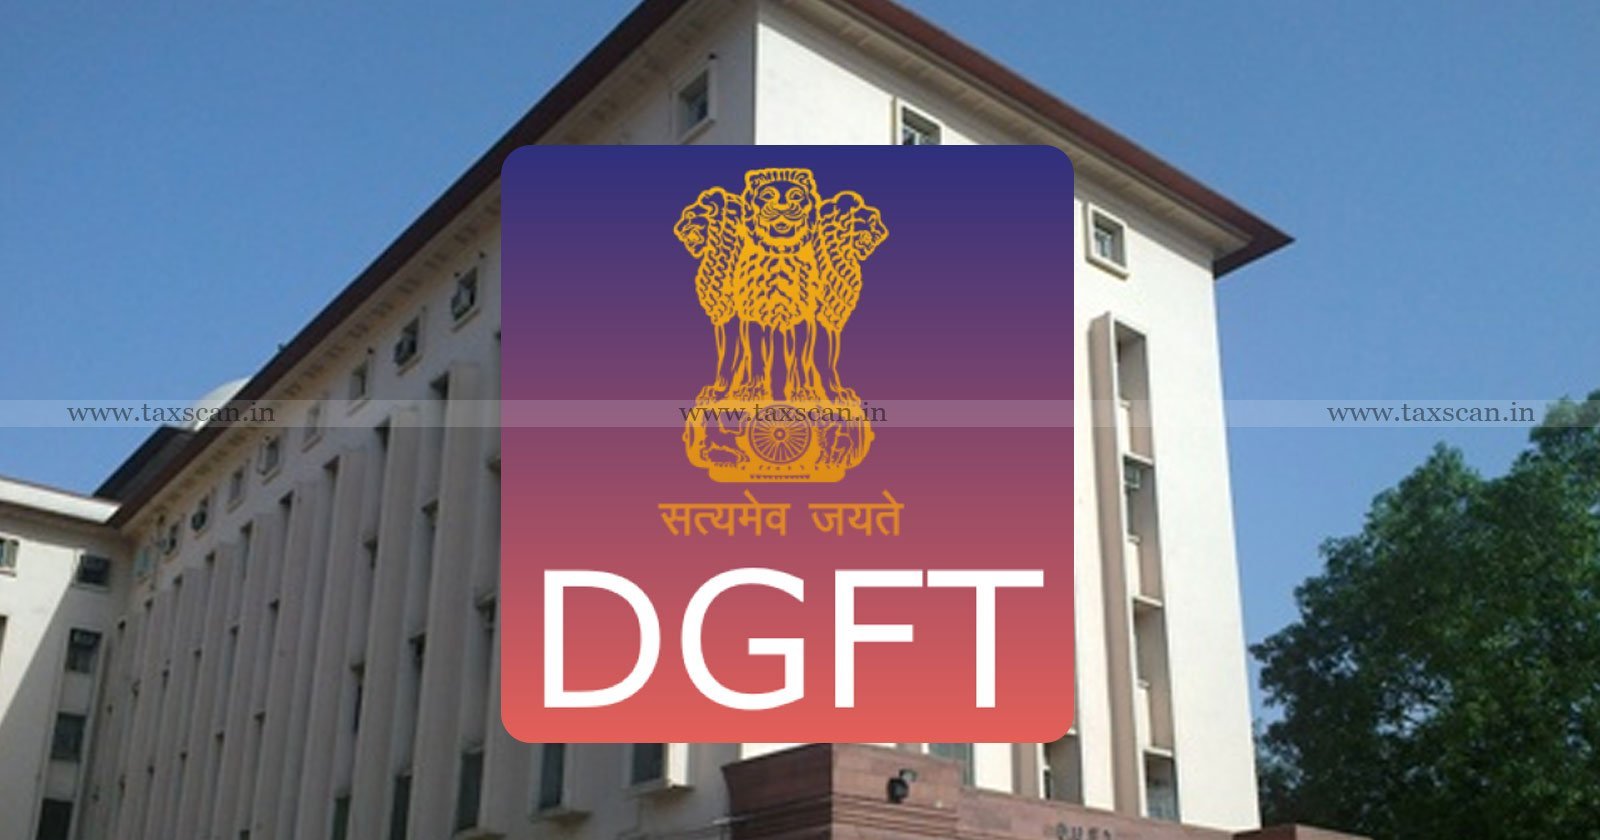 DGFT - Special Clearance - Special Clearance for Patanjali Ayurved's - Patanjali Ayurved's - taxscan